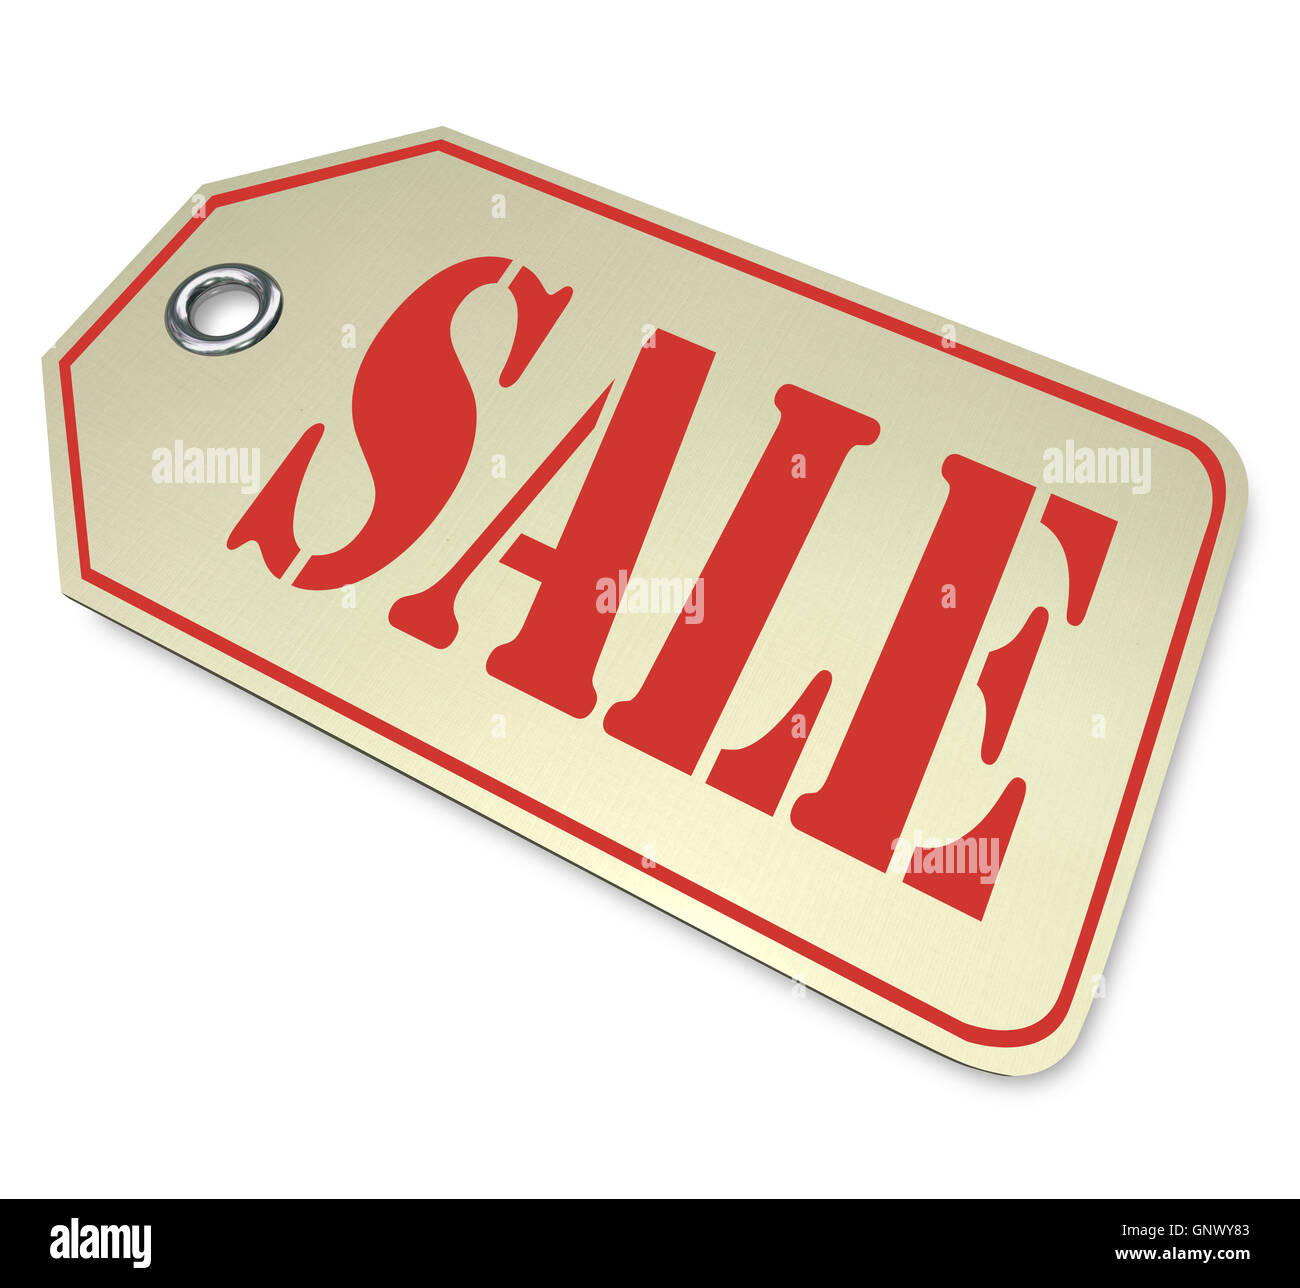 Sale Tag - Special Clearance Prices Cost Less During Store Savin Stock Photo